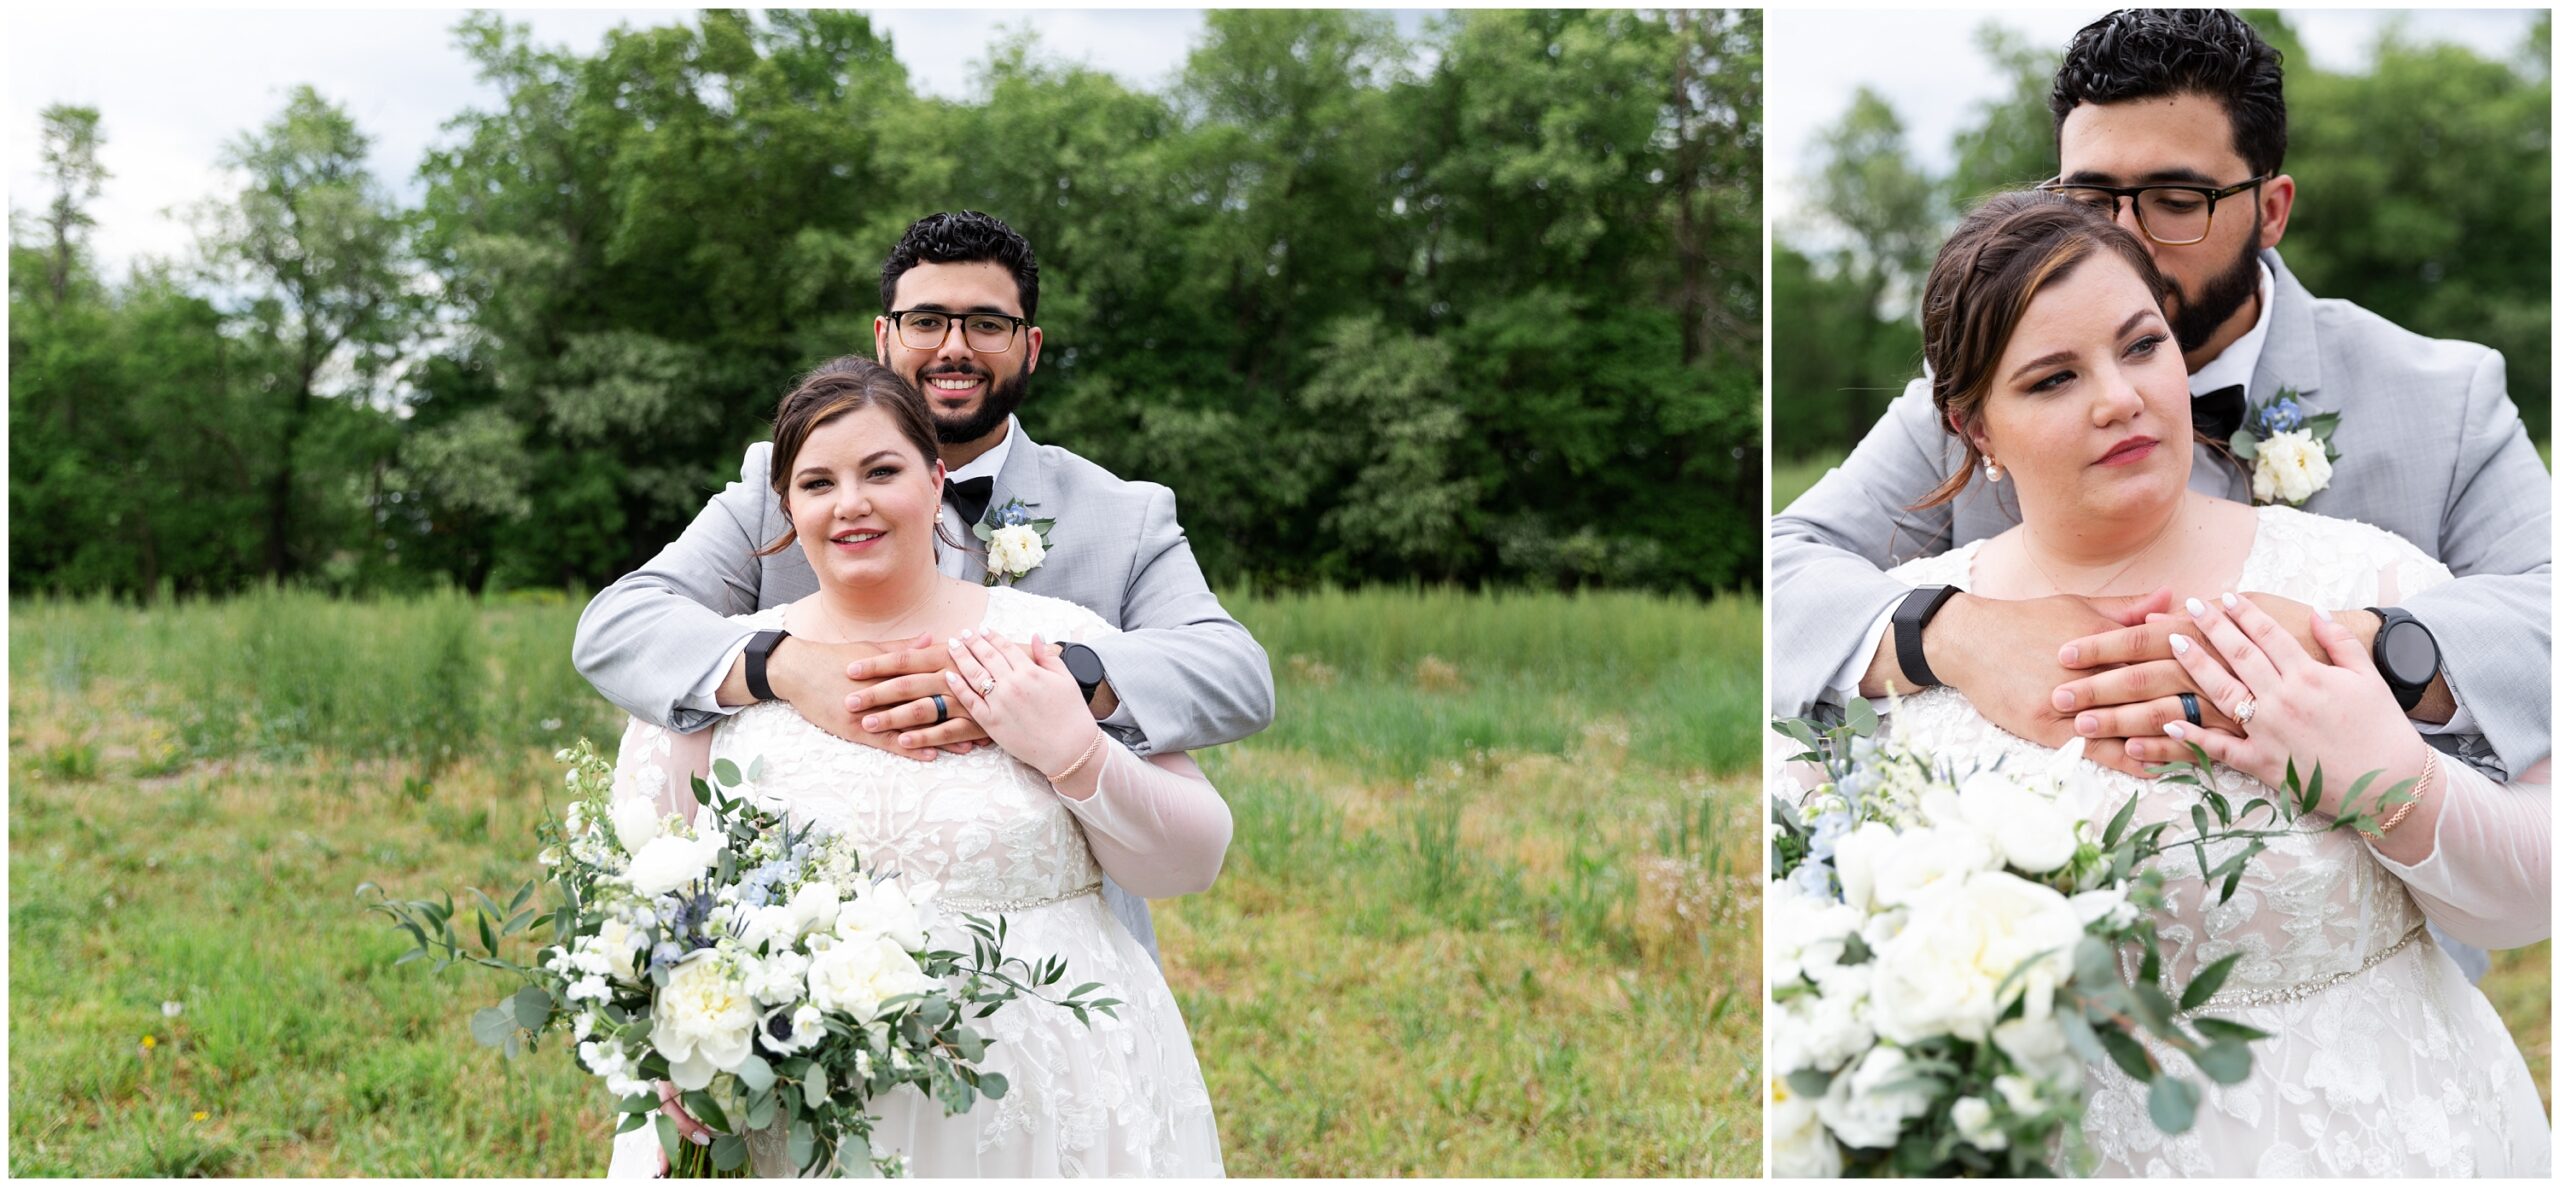 Avenue in Sarver Wedding Photographed by Pittsburgh Wedding Photographer Acevedo Weddings